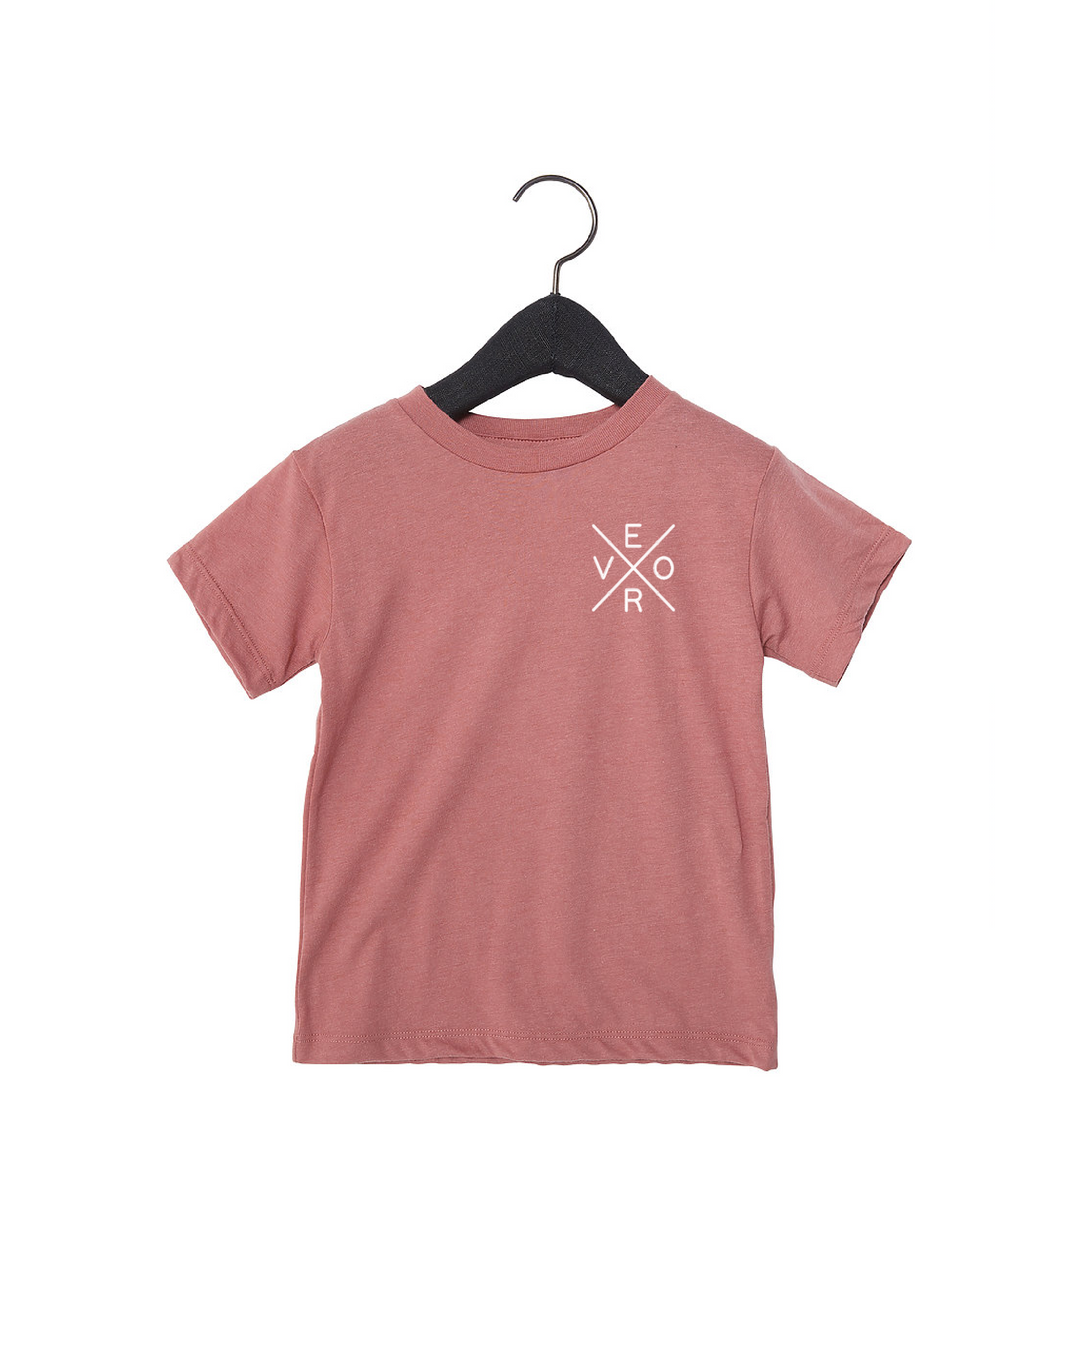 Vero Toddler T - Mauve (Embroidered)